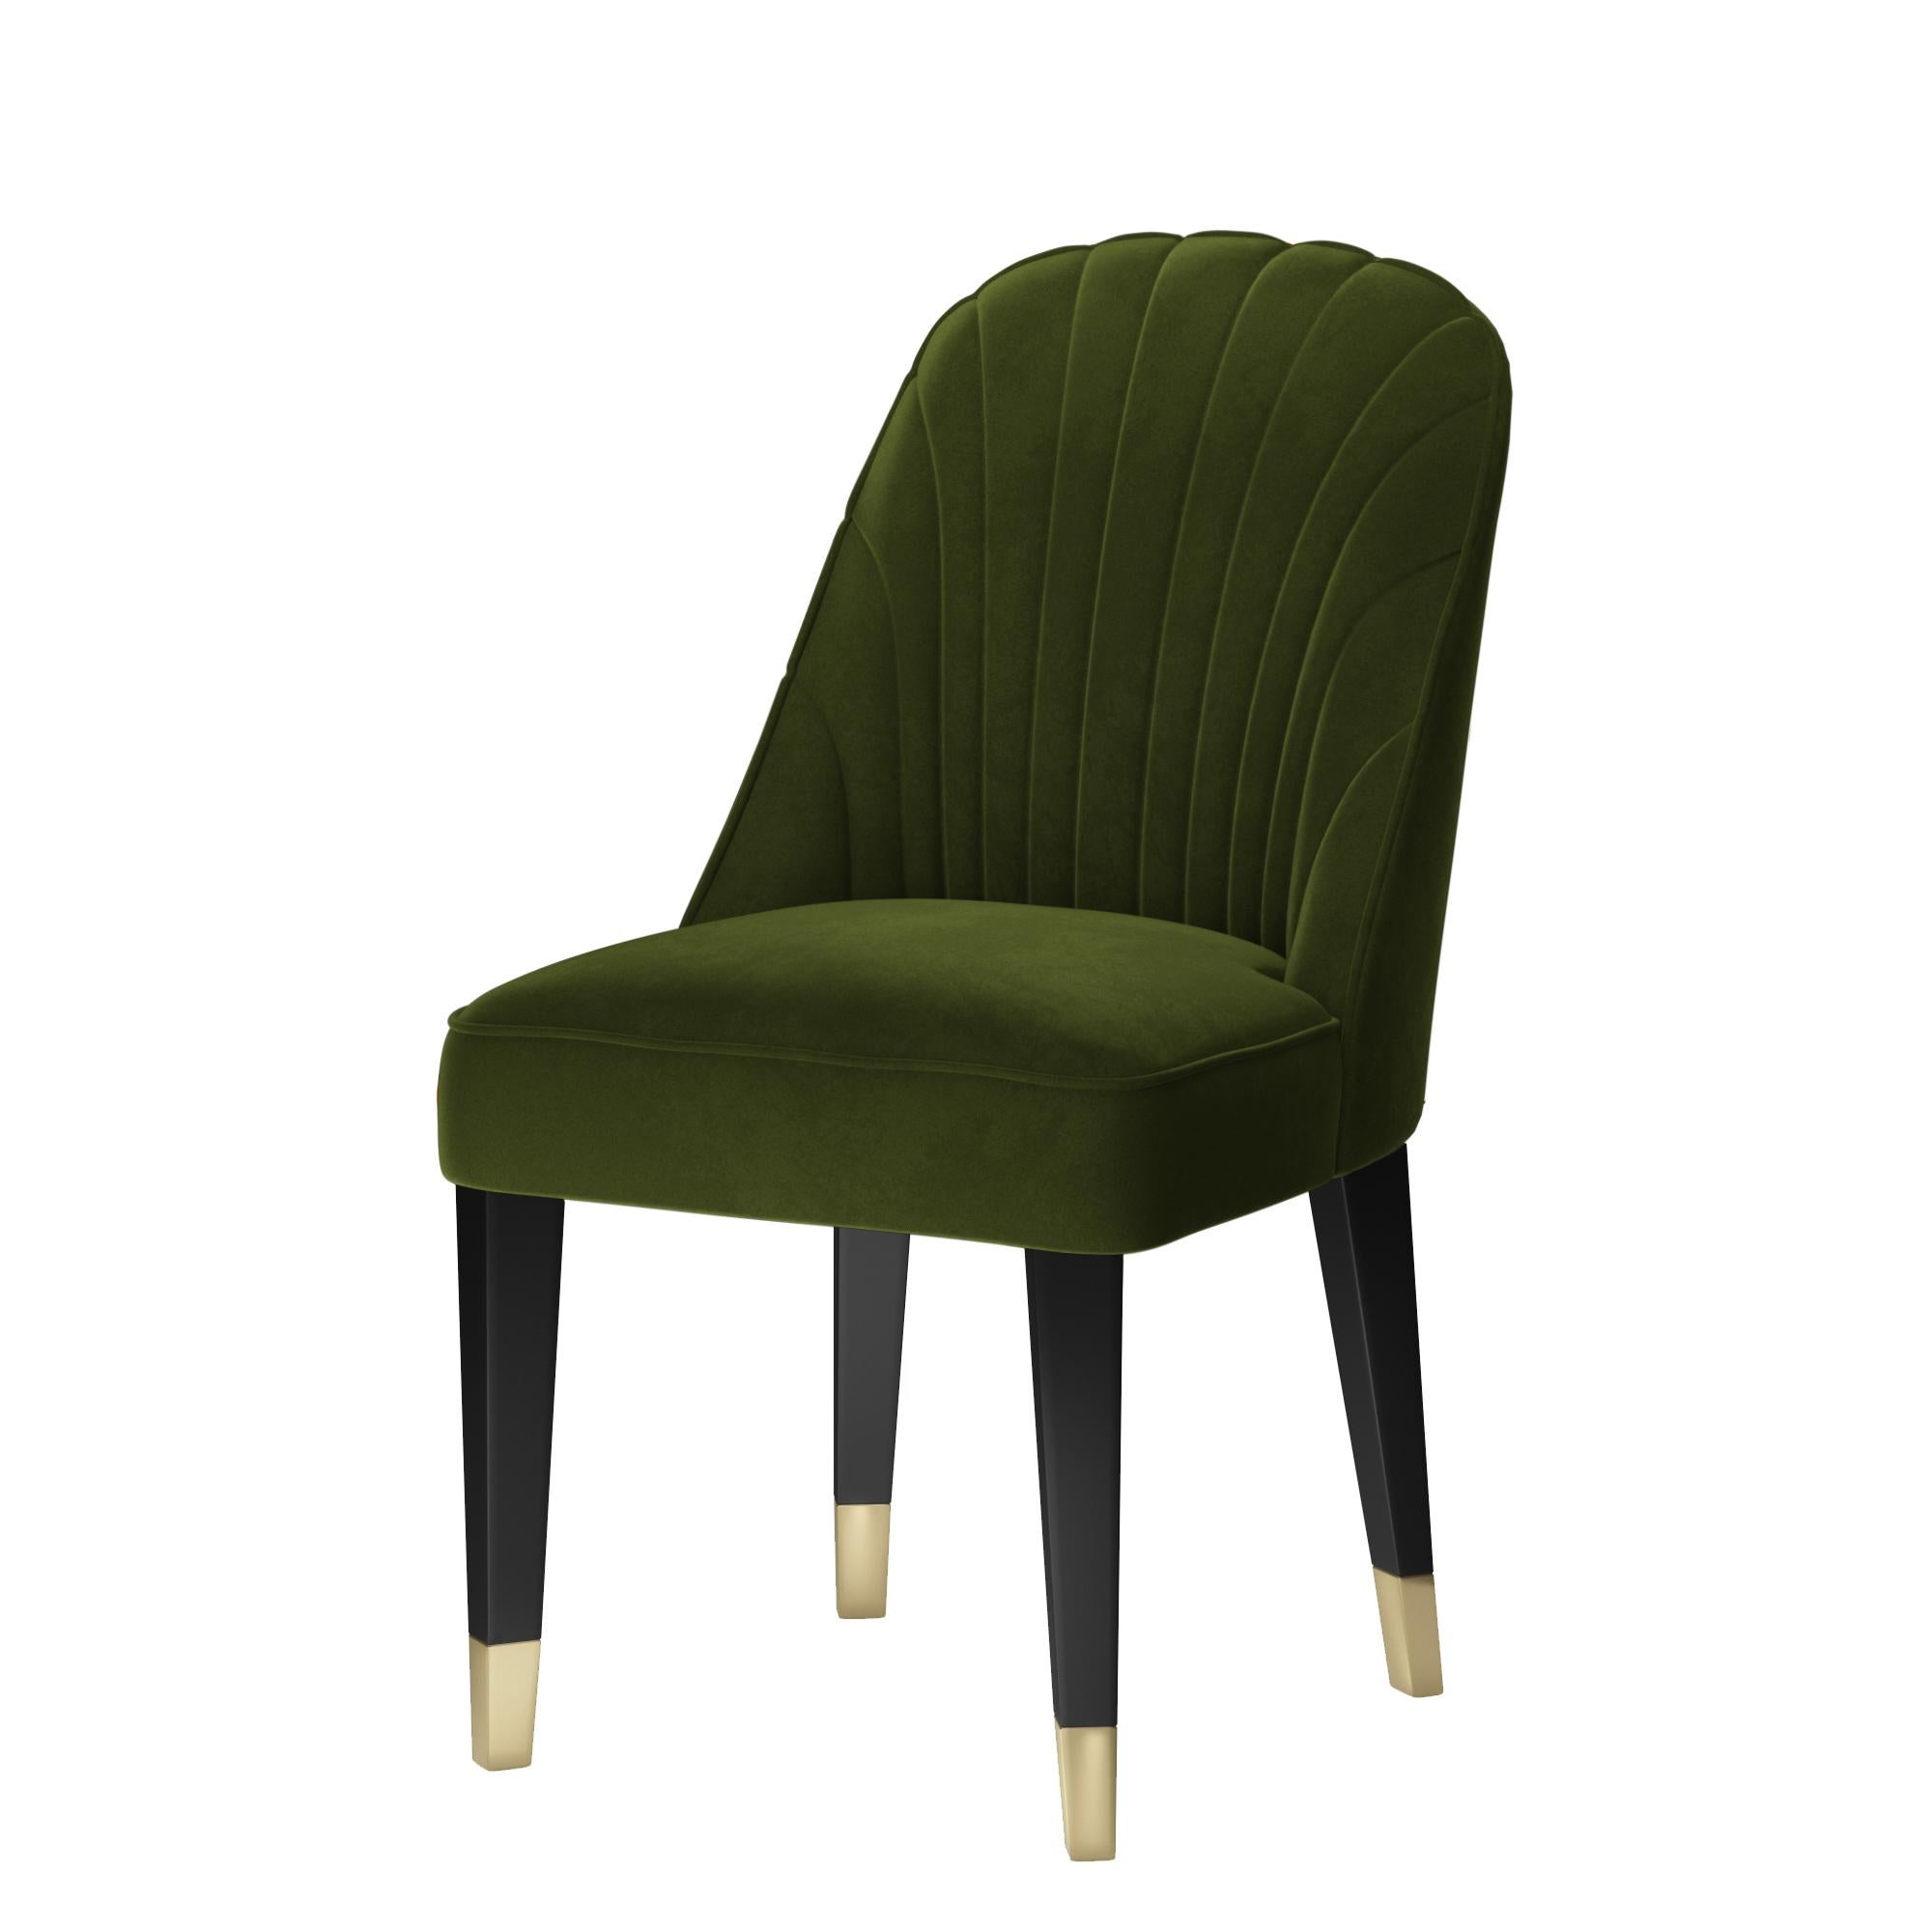 Velvet Upholstered dining chair featuring a sculptural curved back with tufted padding to achieve the perfect angle for relaxation. Upholstered in stain resistant and water repellent velvet.
Frame finished in ebony with polished stainless steel